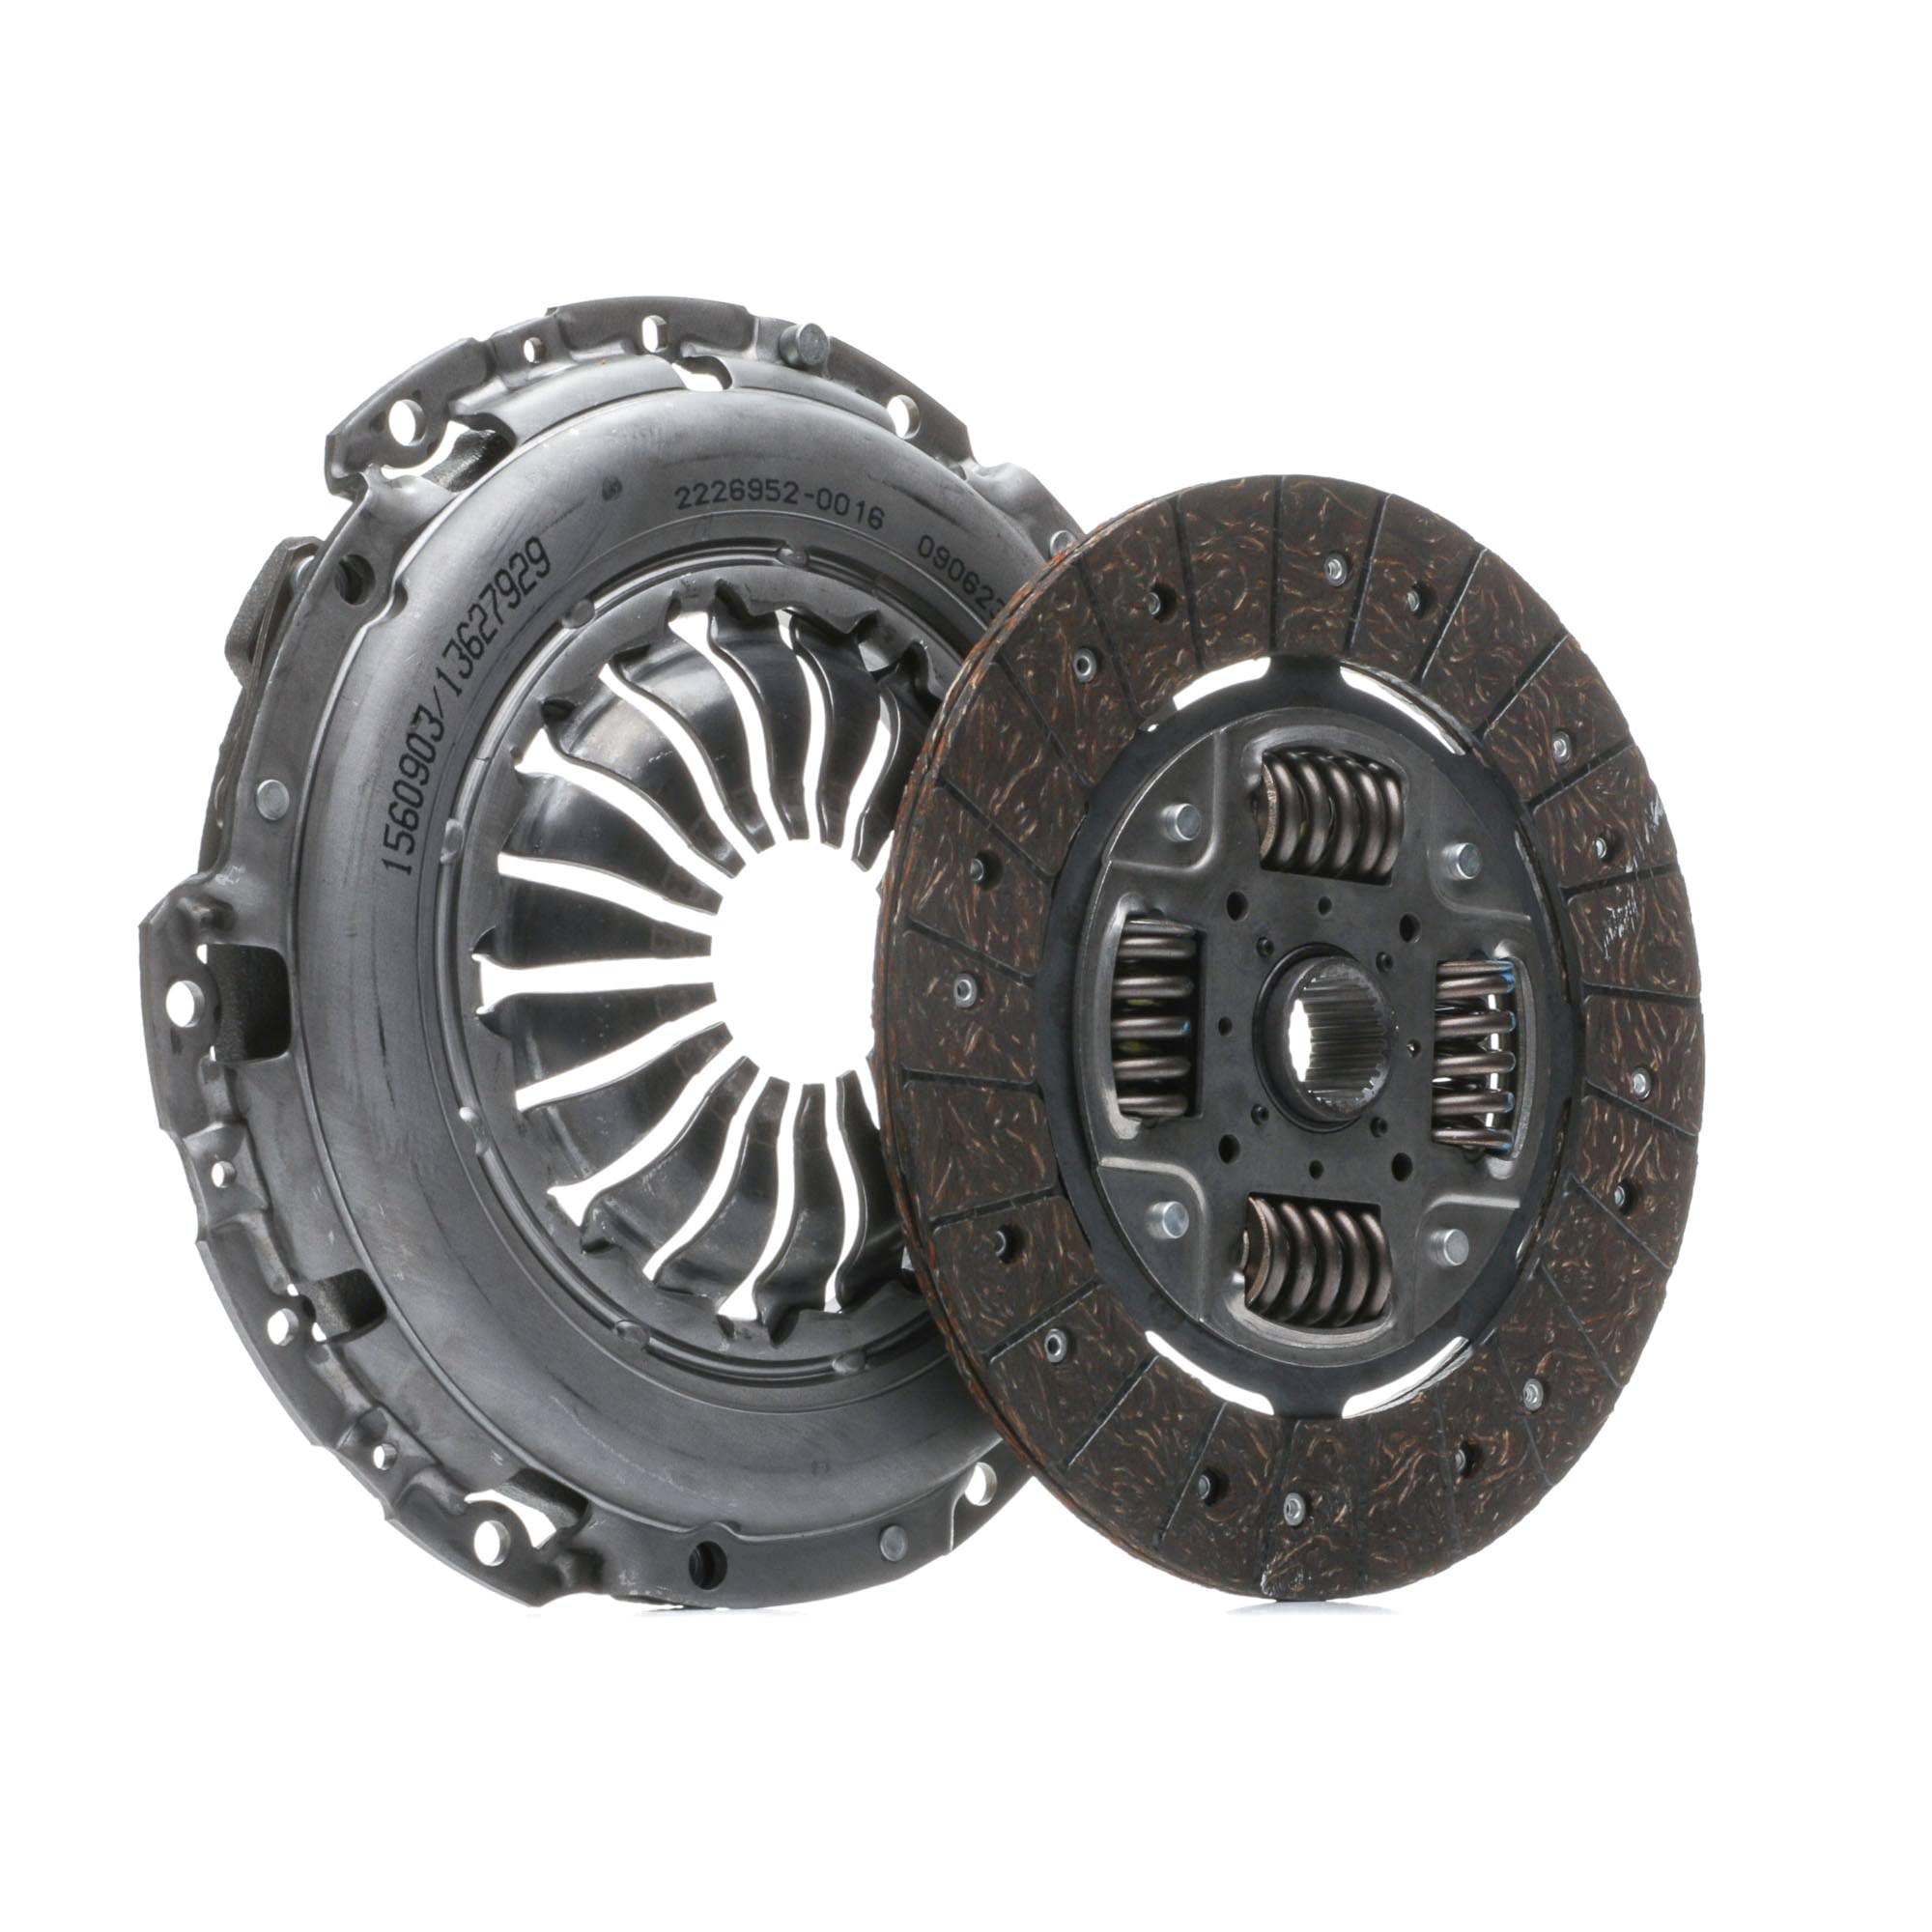 479C0071 RIDEX Clutch set MERCEDES-BENZ for engines with dual-mass flywheel, with clutch pressure plate, without central slave cylinder, with clutch disc, 241mm